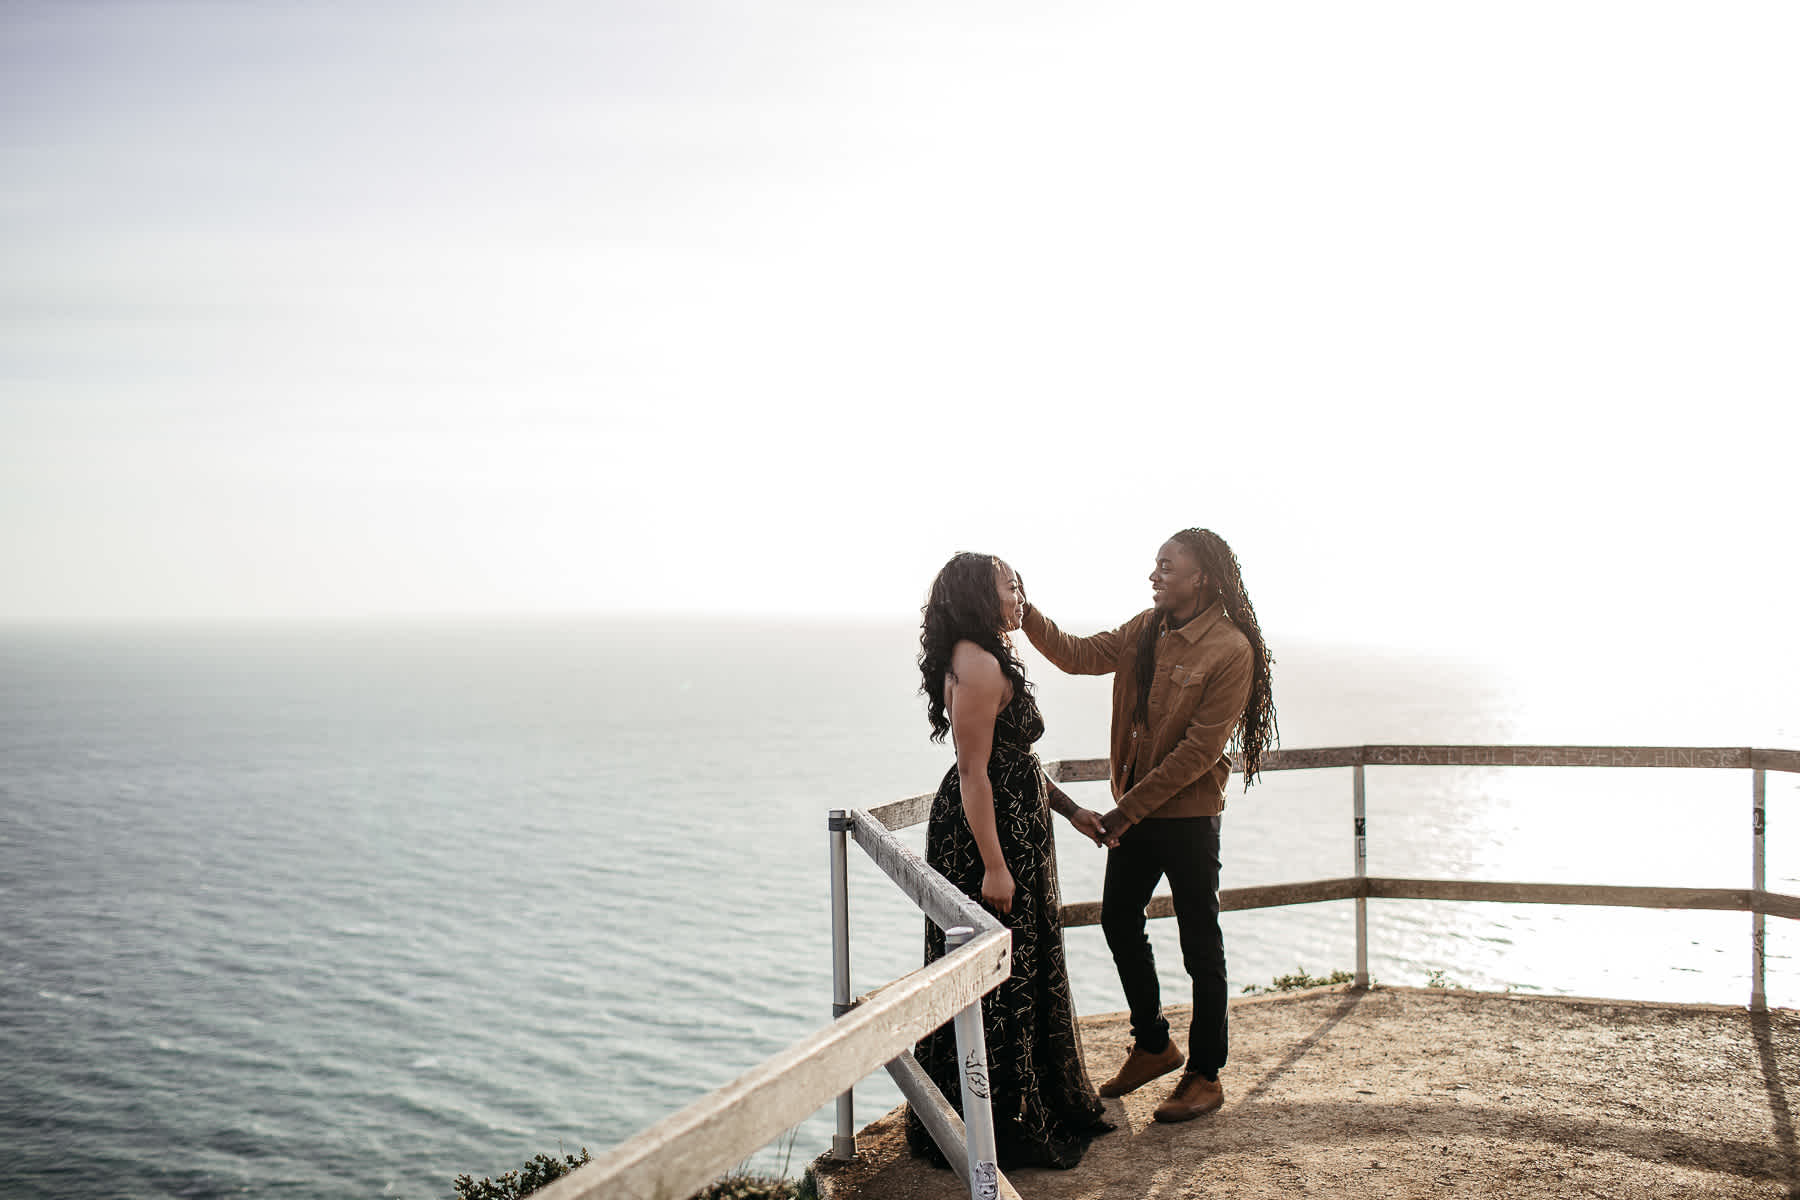 muir-beach-ca-spring-lifestyle-engagement-session-12